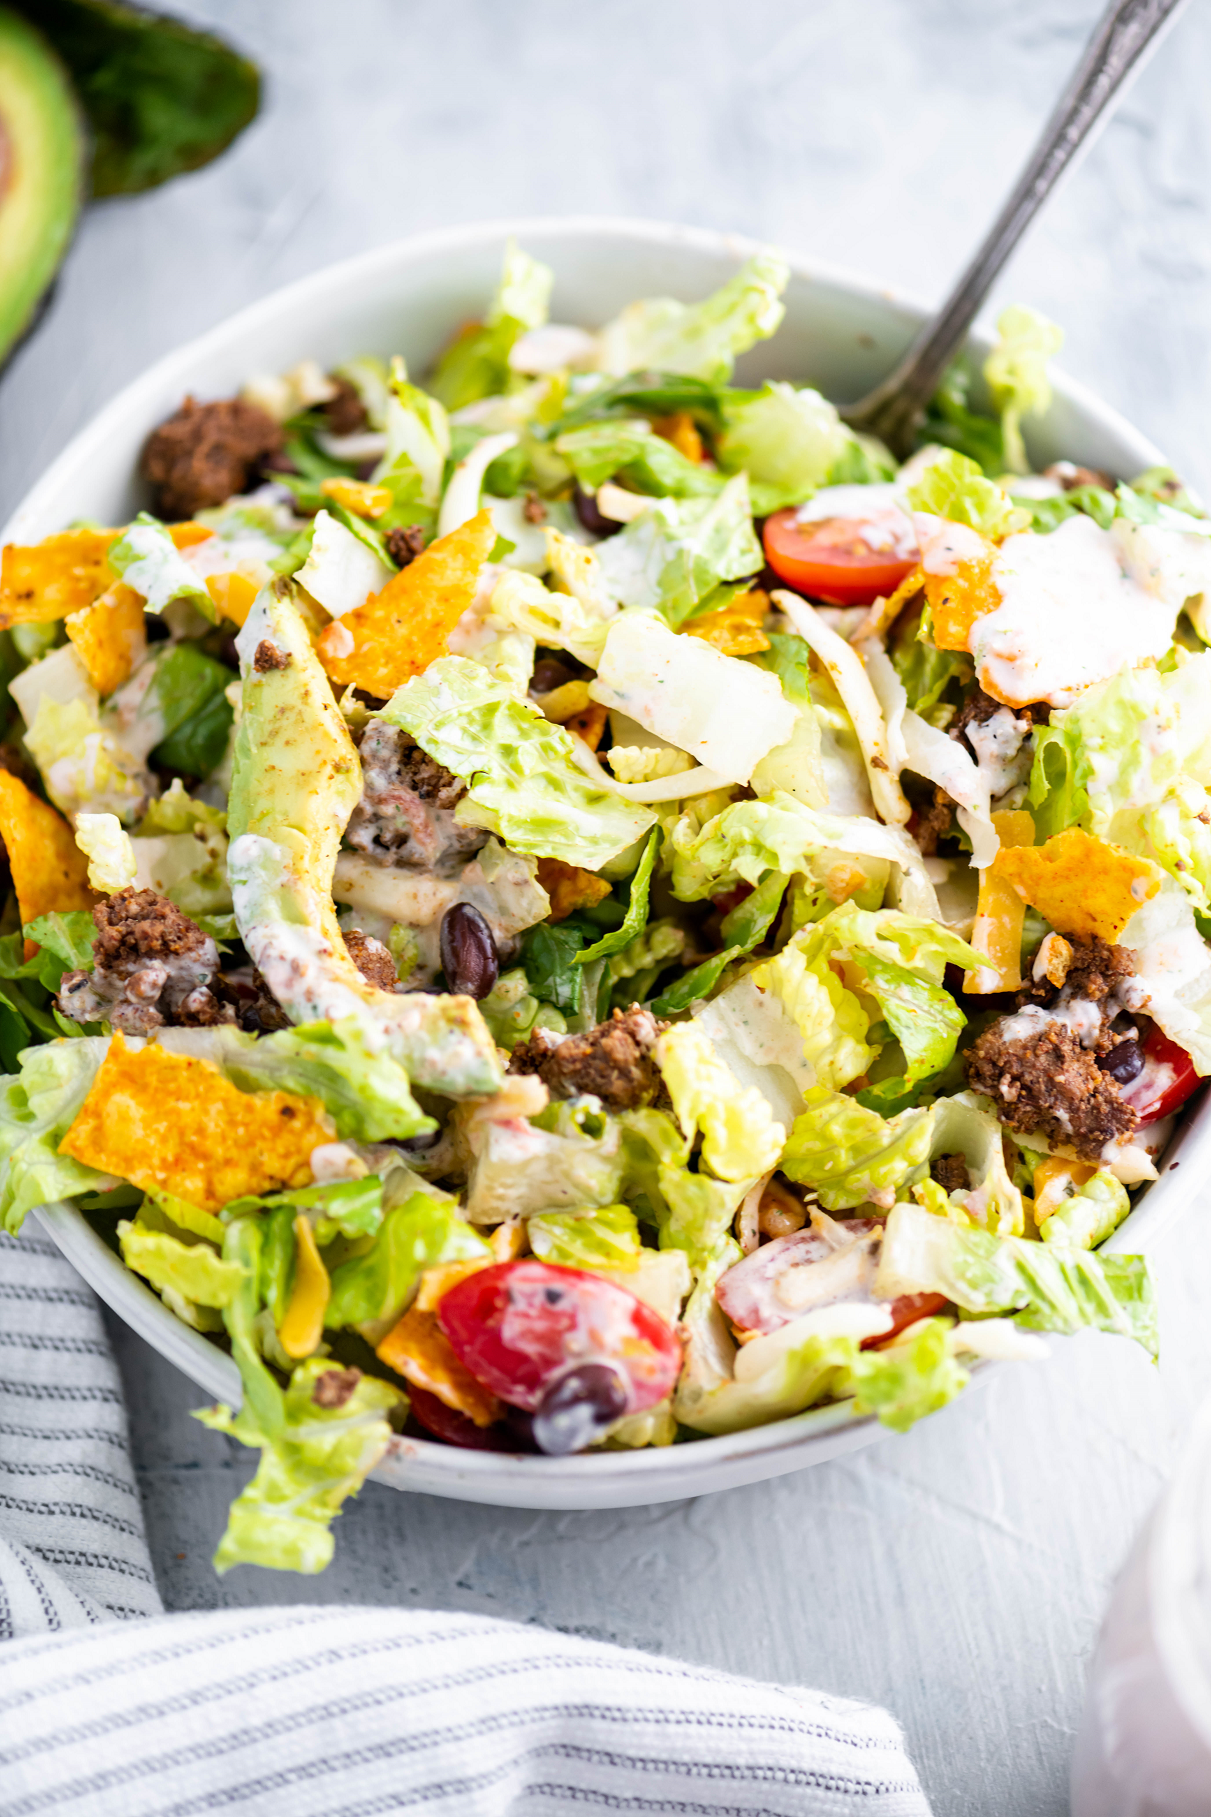 Large bowl of ground beef taco salad